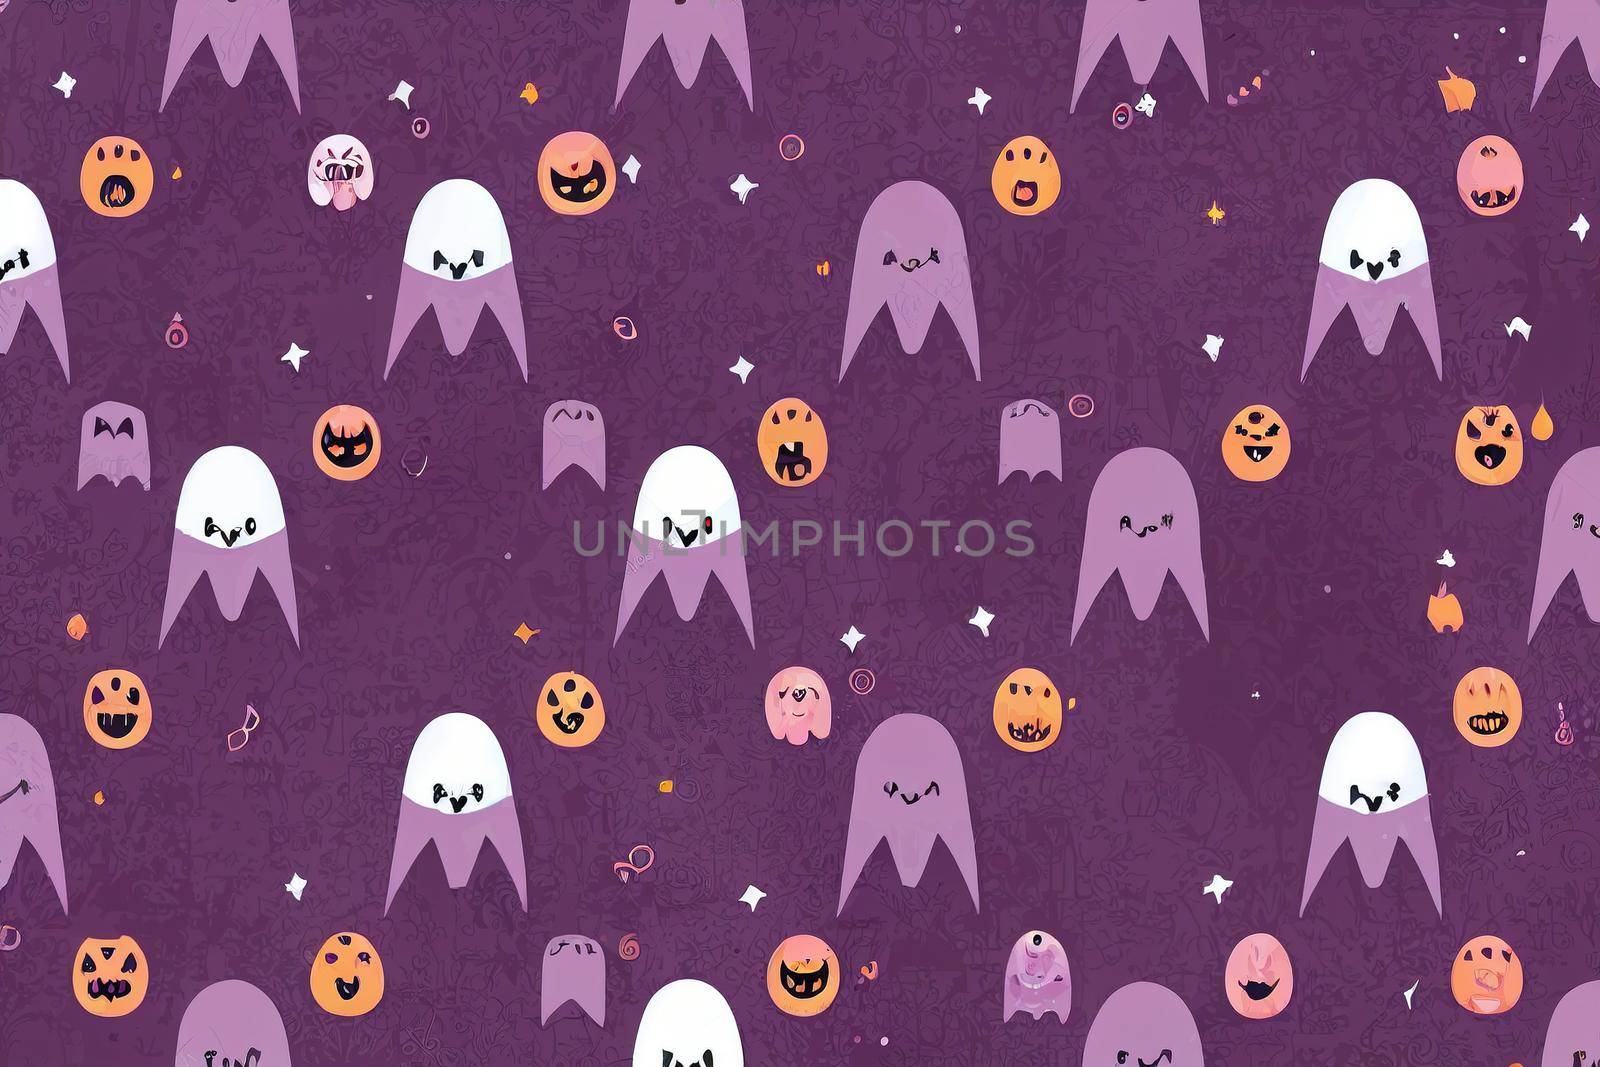 Cute Halloween Illustration, Infantile Style Halloween Party Print with Funny Vampire Isolated on a Violet Background Ideal for Card,Wall Art, Starry Irregular Seamless Pattern, ,toon style v1